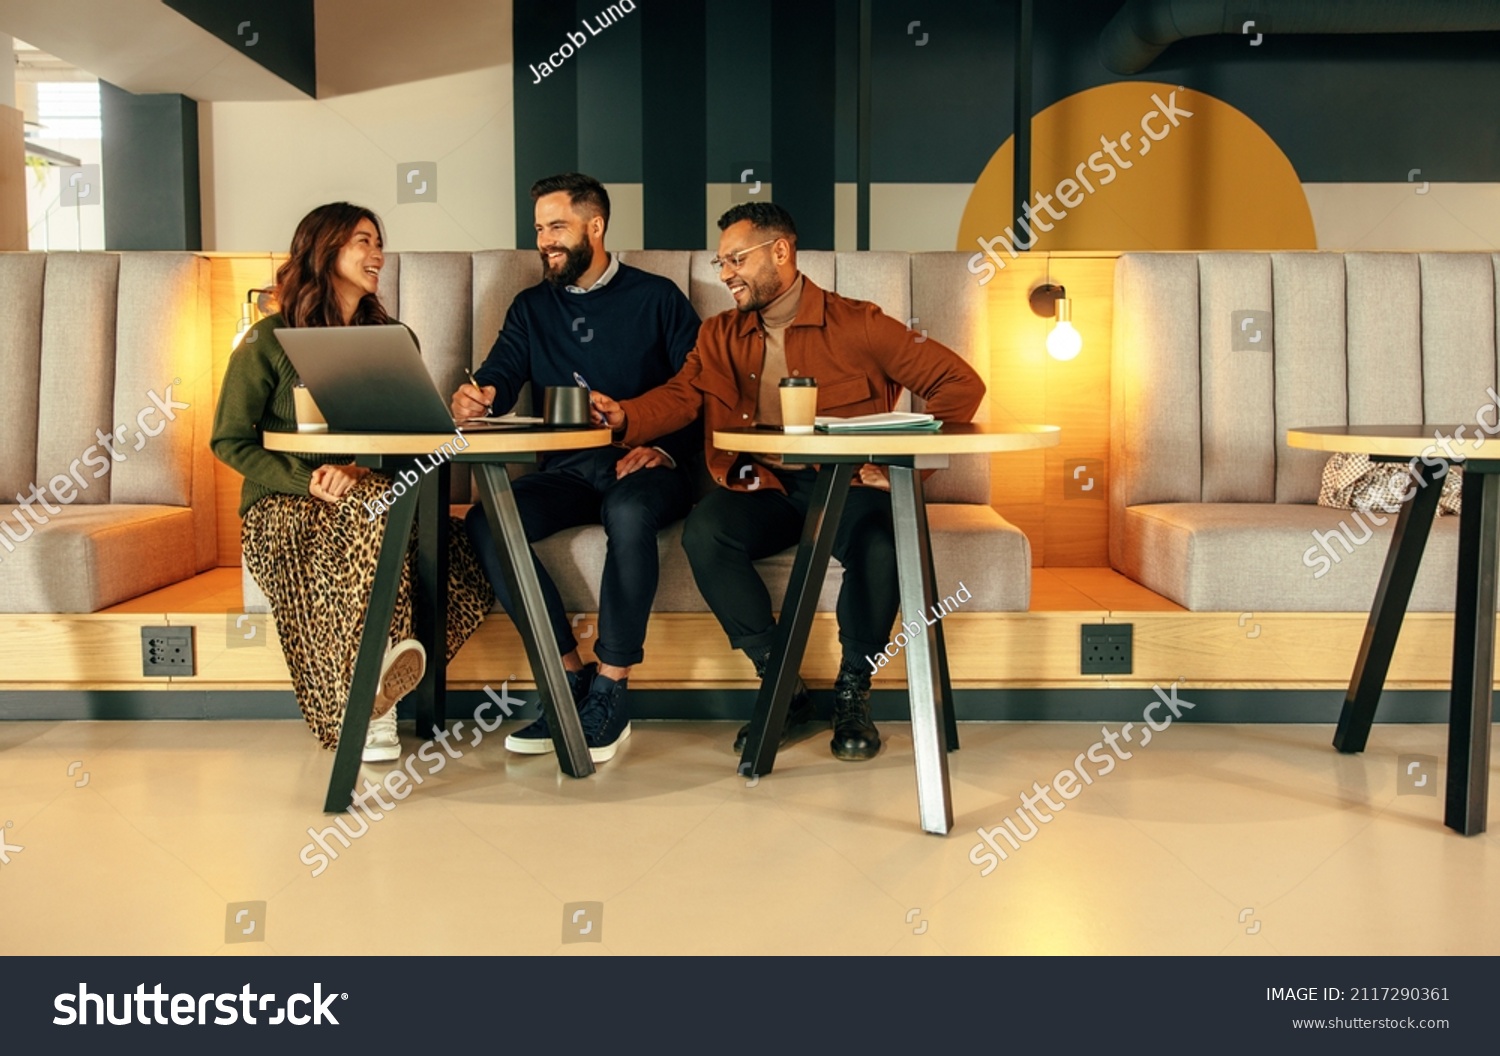 Modern entrepreneurs working together in a lobby. Team of happy businesspeople smiling while having a discussion. Group of entrepreneurs collaborating on a new project in a co-working space. #2117290361